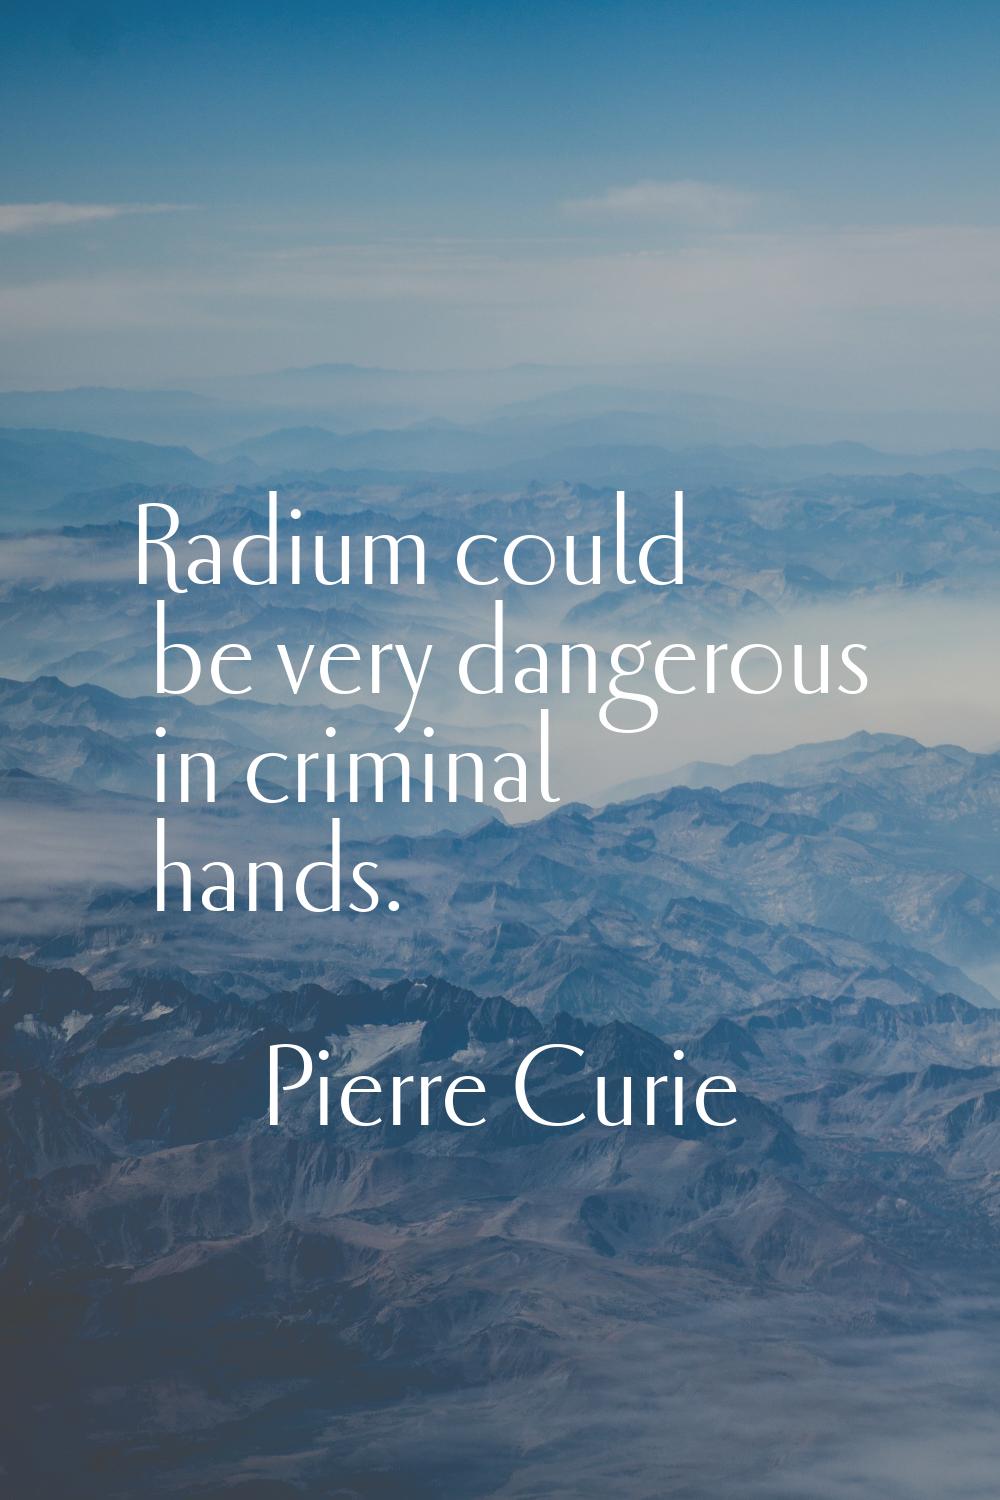 Radium could be very dangerous in criminal hands.